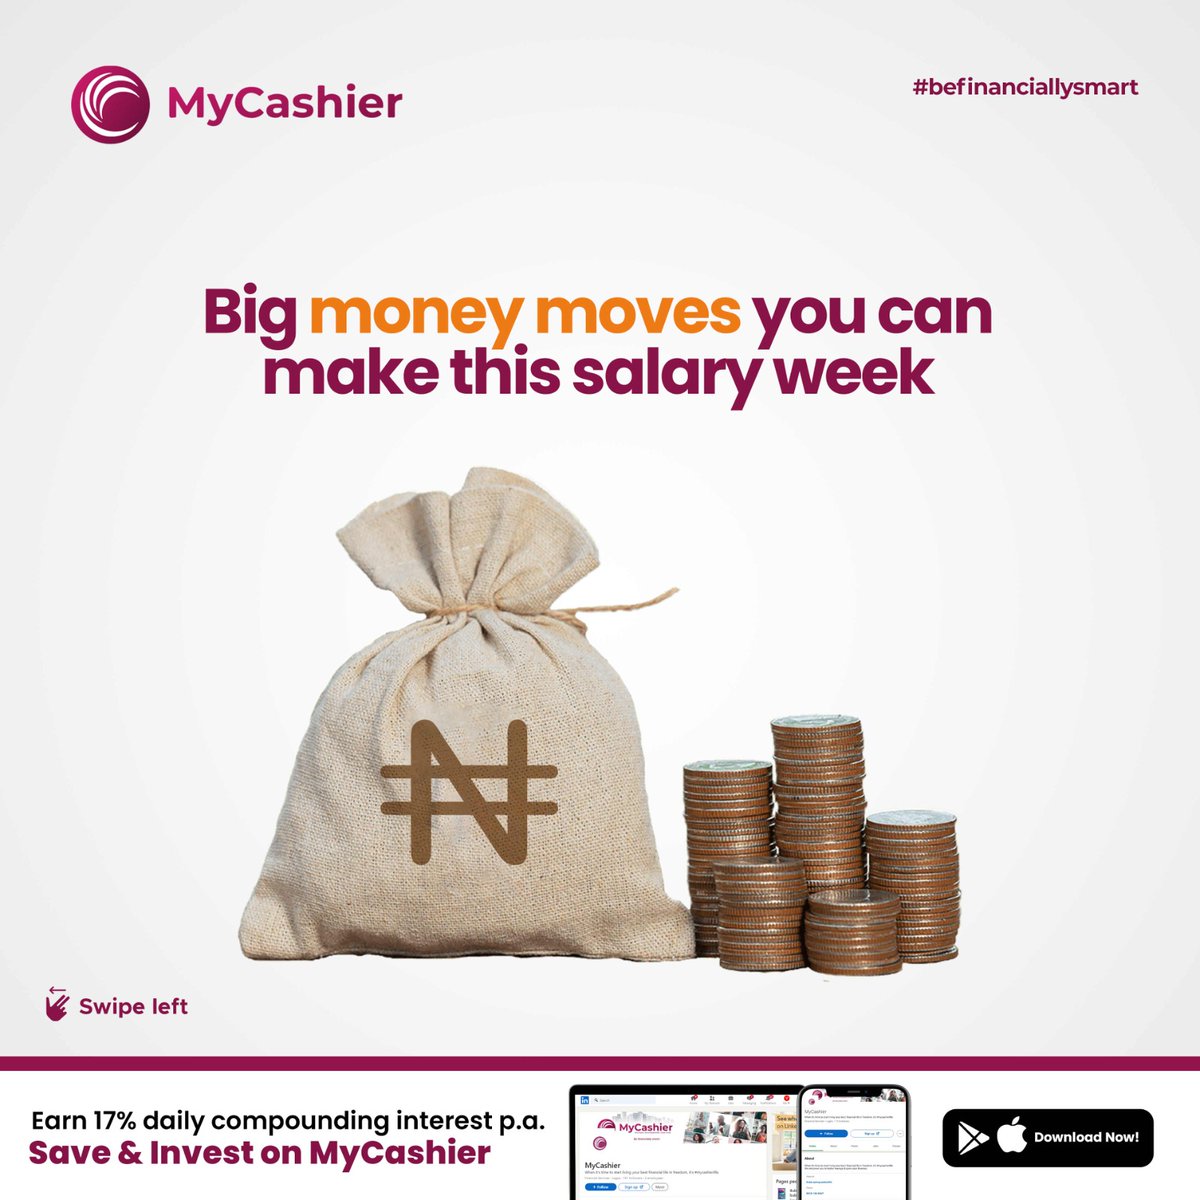 It’s another salary week and there is no better time to make money moves that will impact your finances in the coming month.

Swipe to see some money moves you can take this week to up your savings game 👉

#Salaryweek #mycashierlife #Savings #Goals